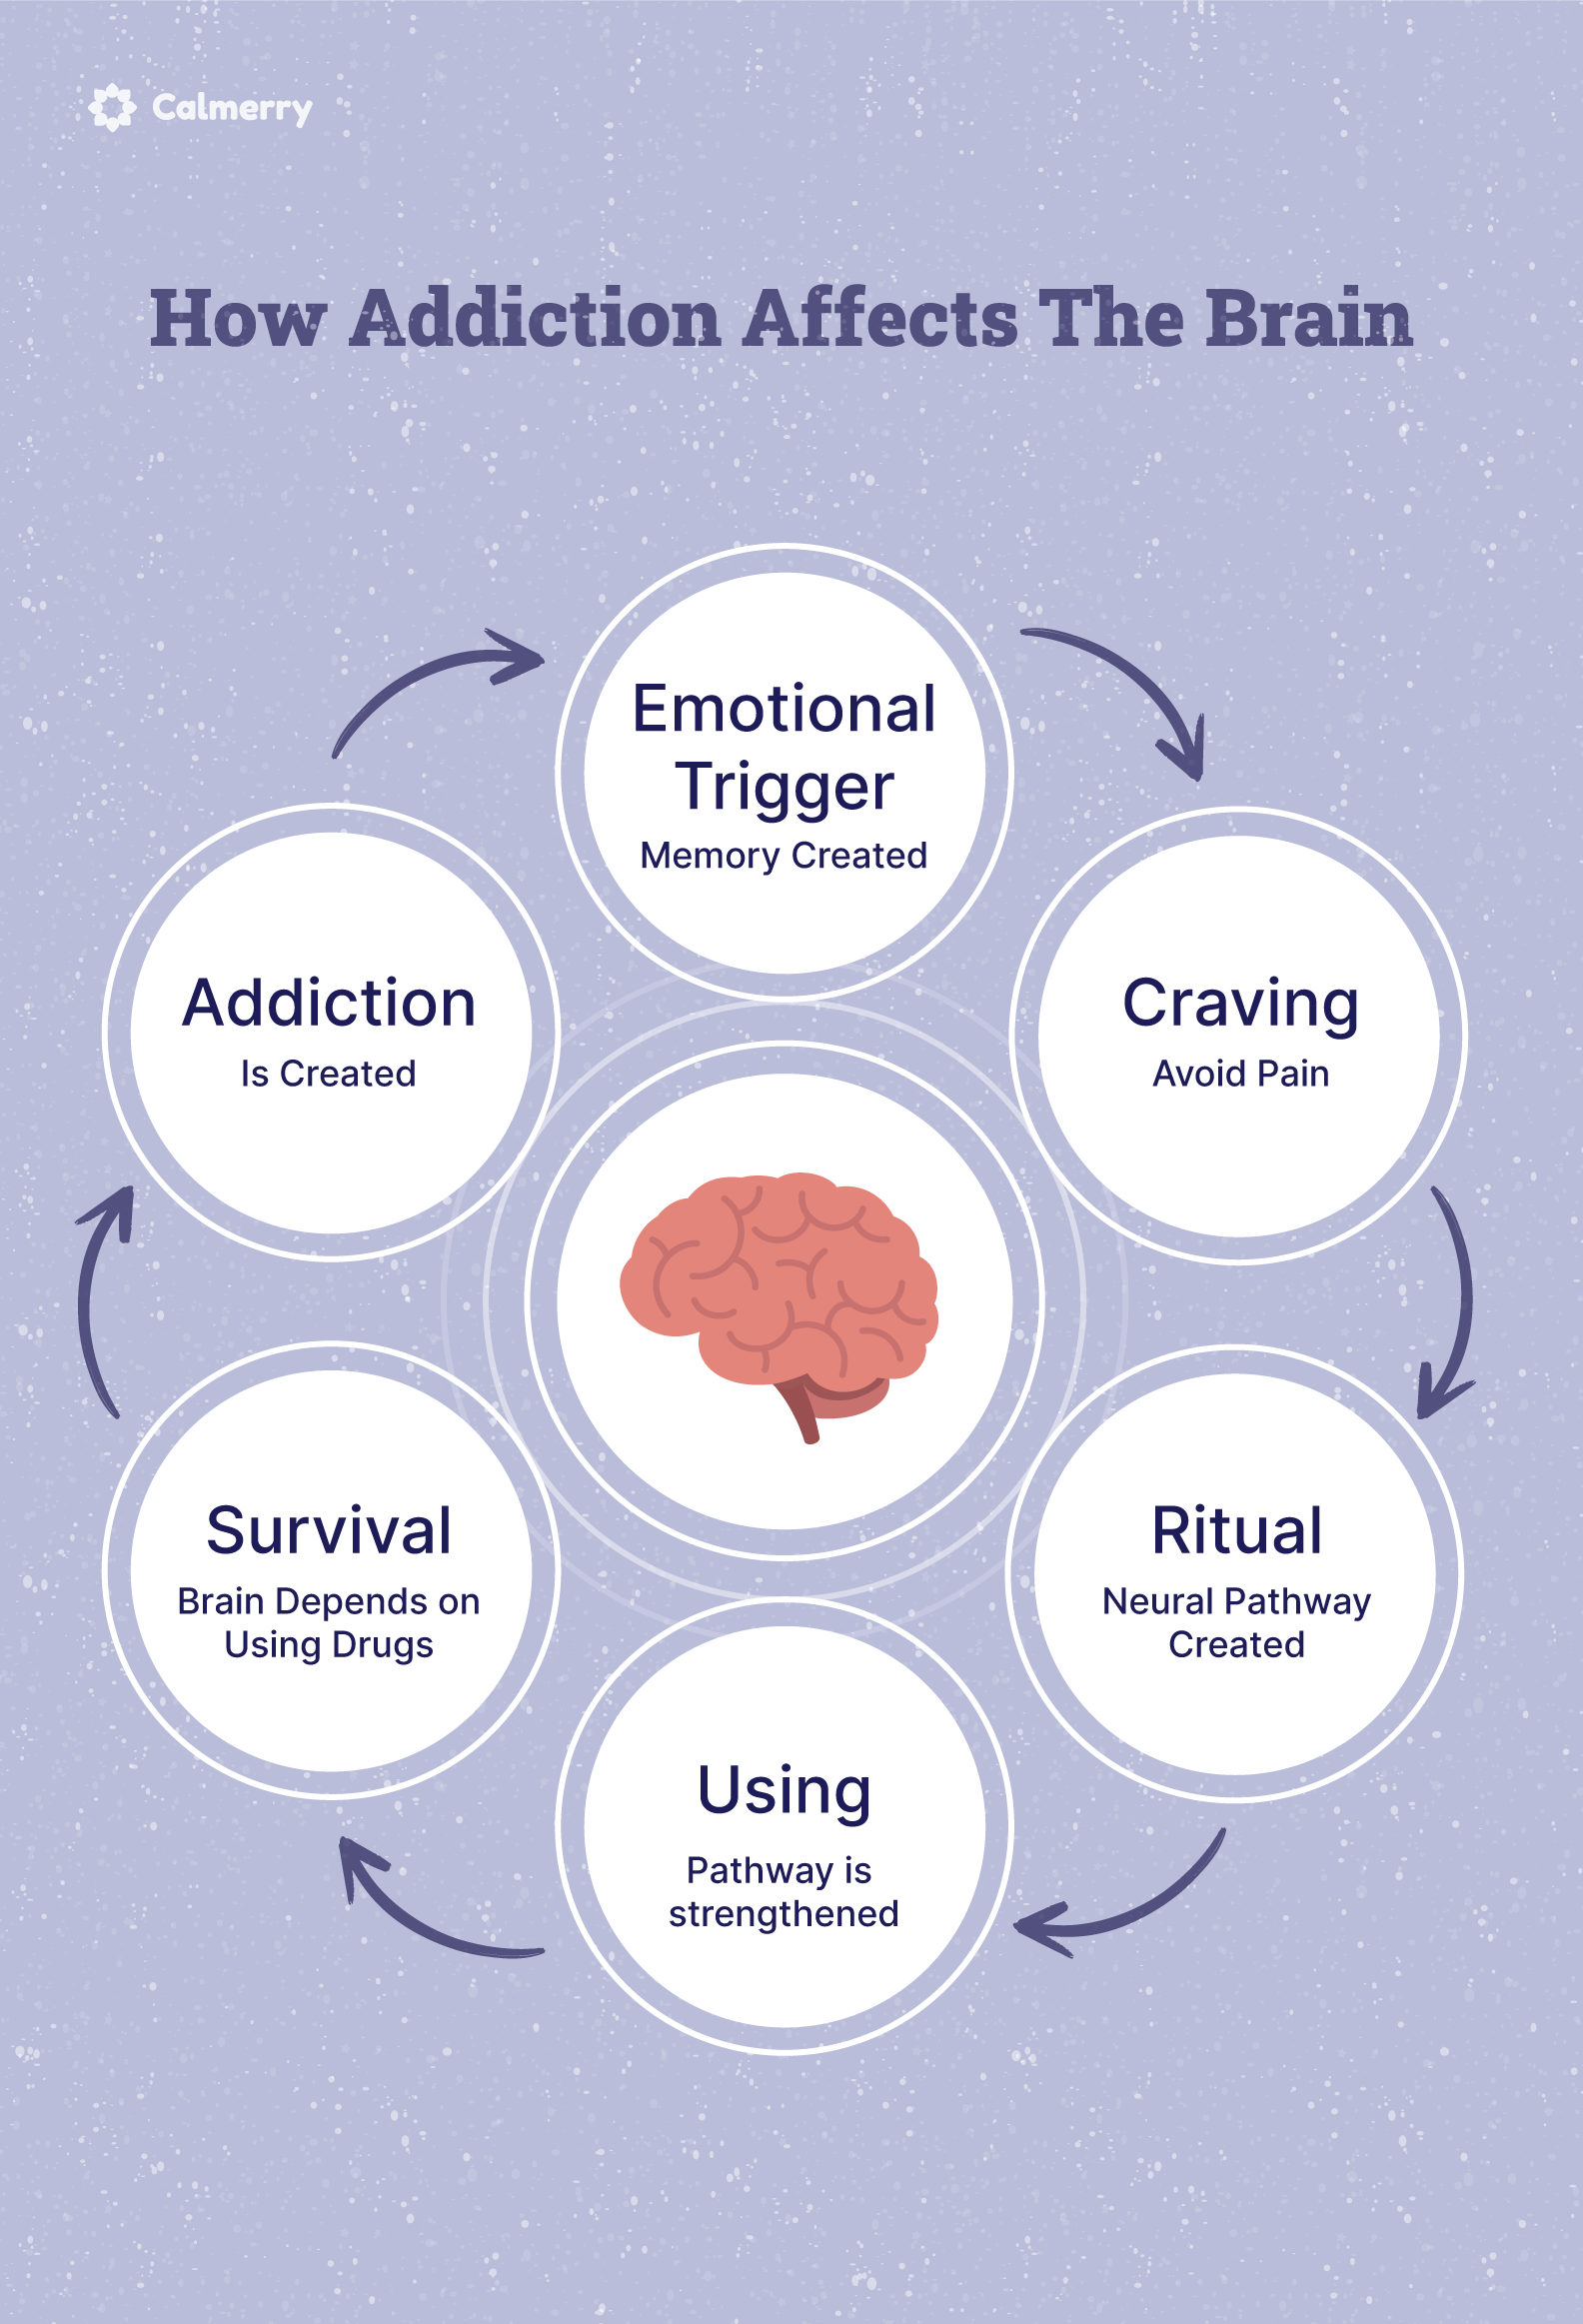 Why overcoming addiction is so difficult